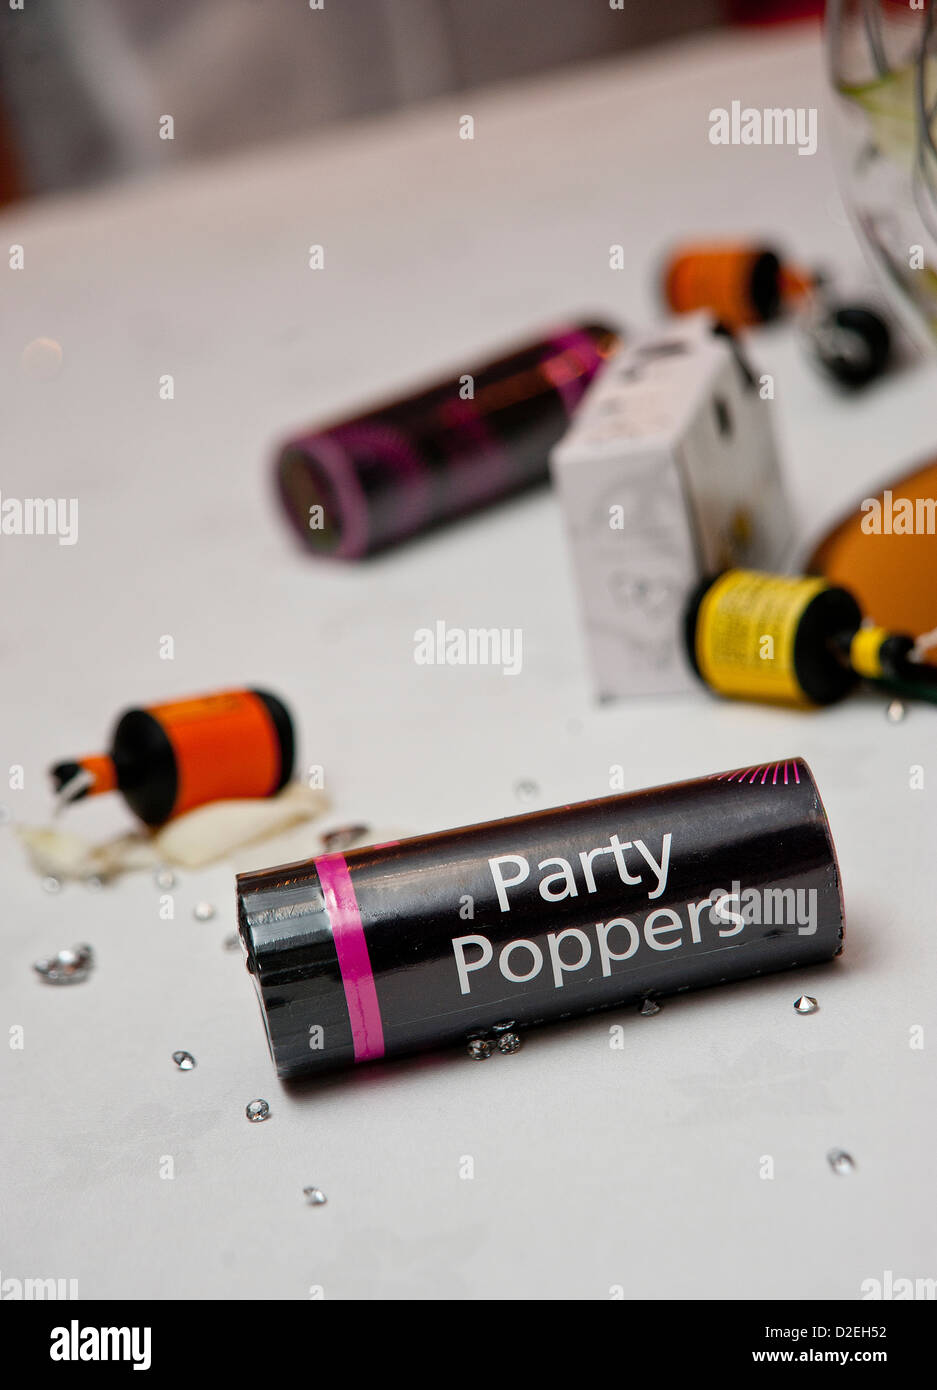 Party poppers left on a table at a party Stock Photo